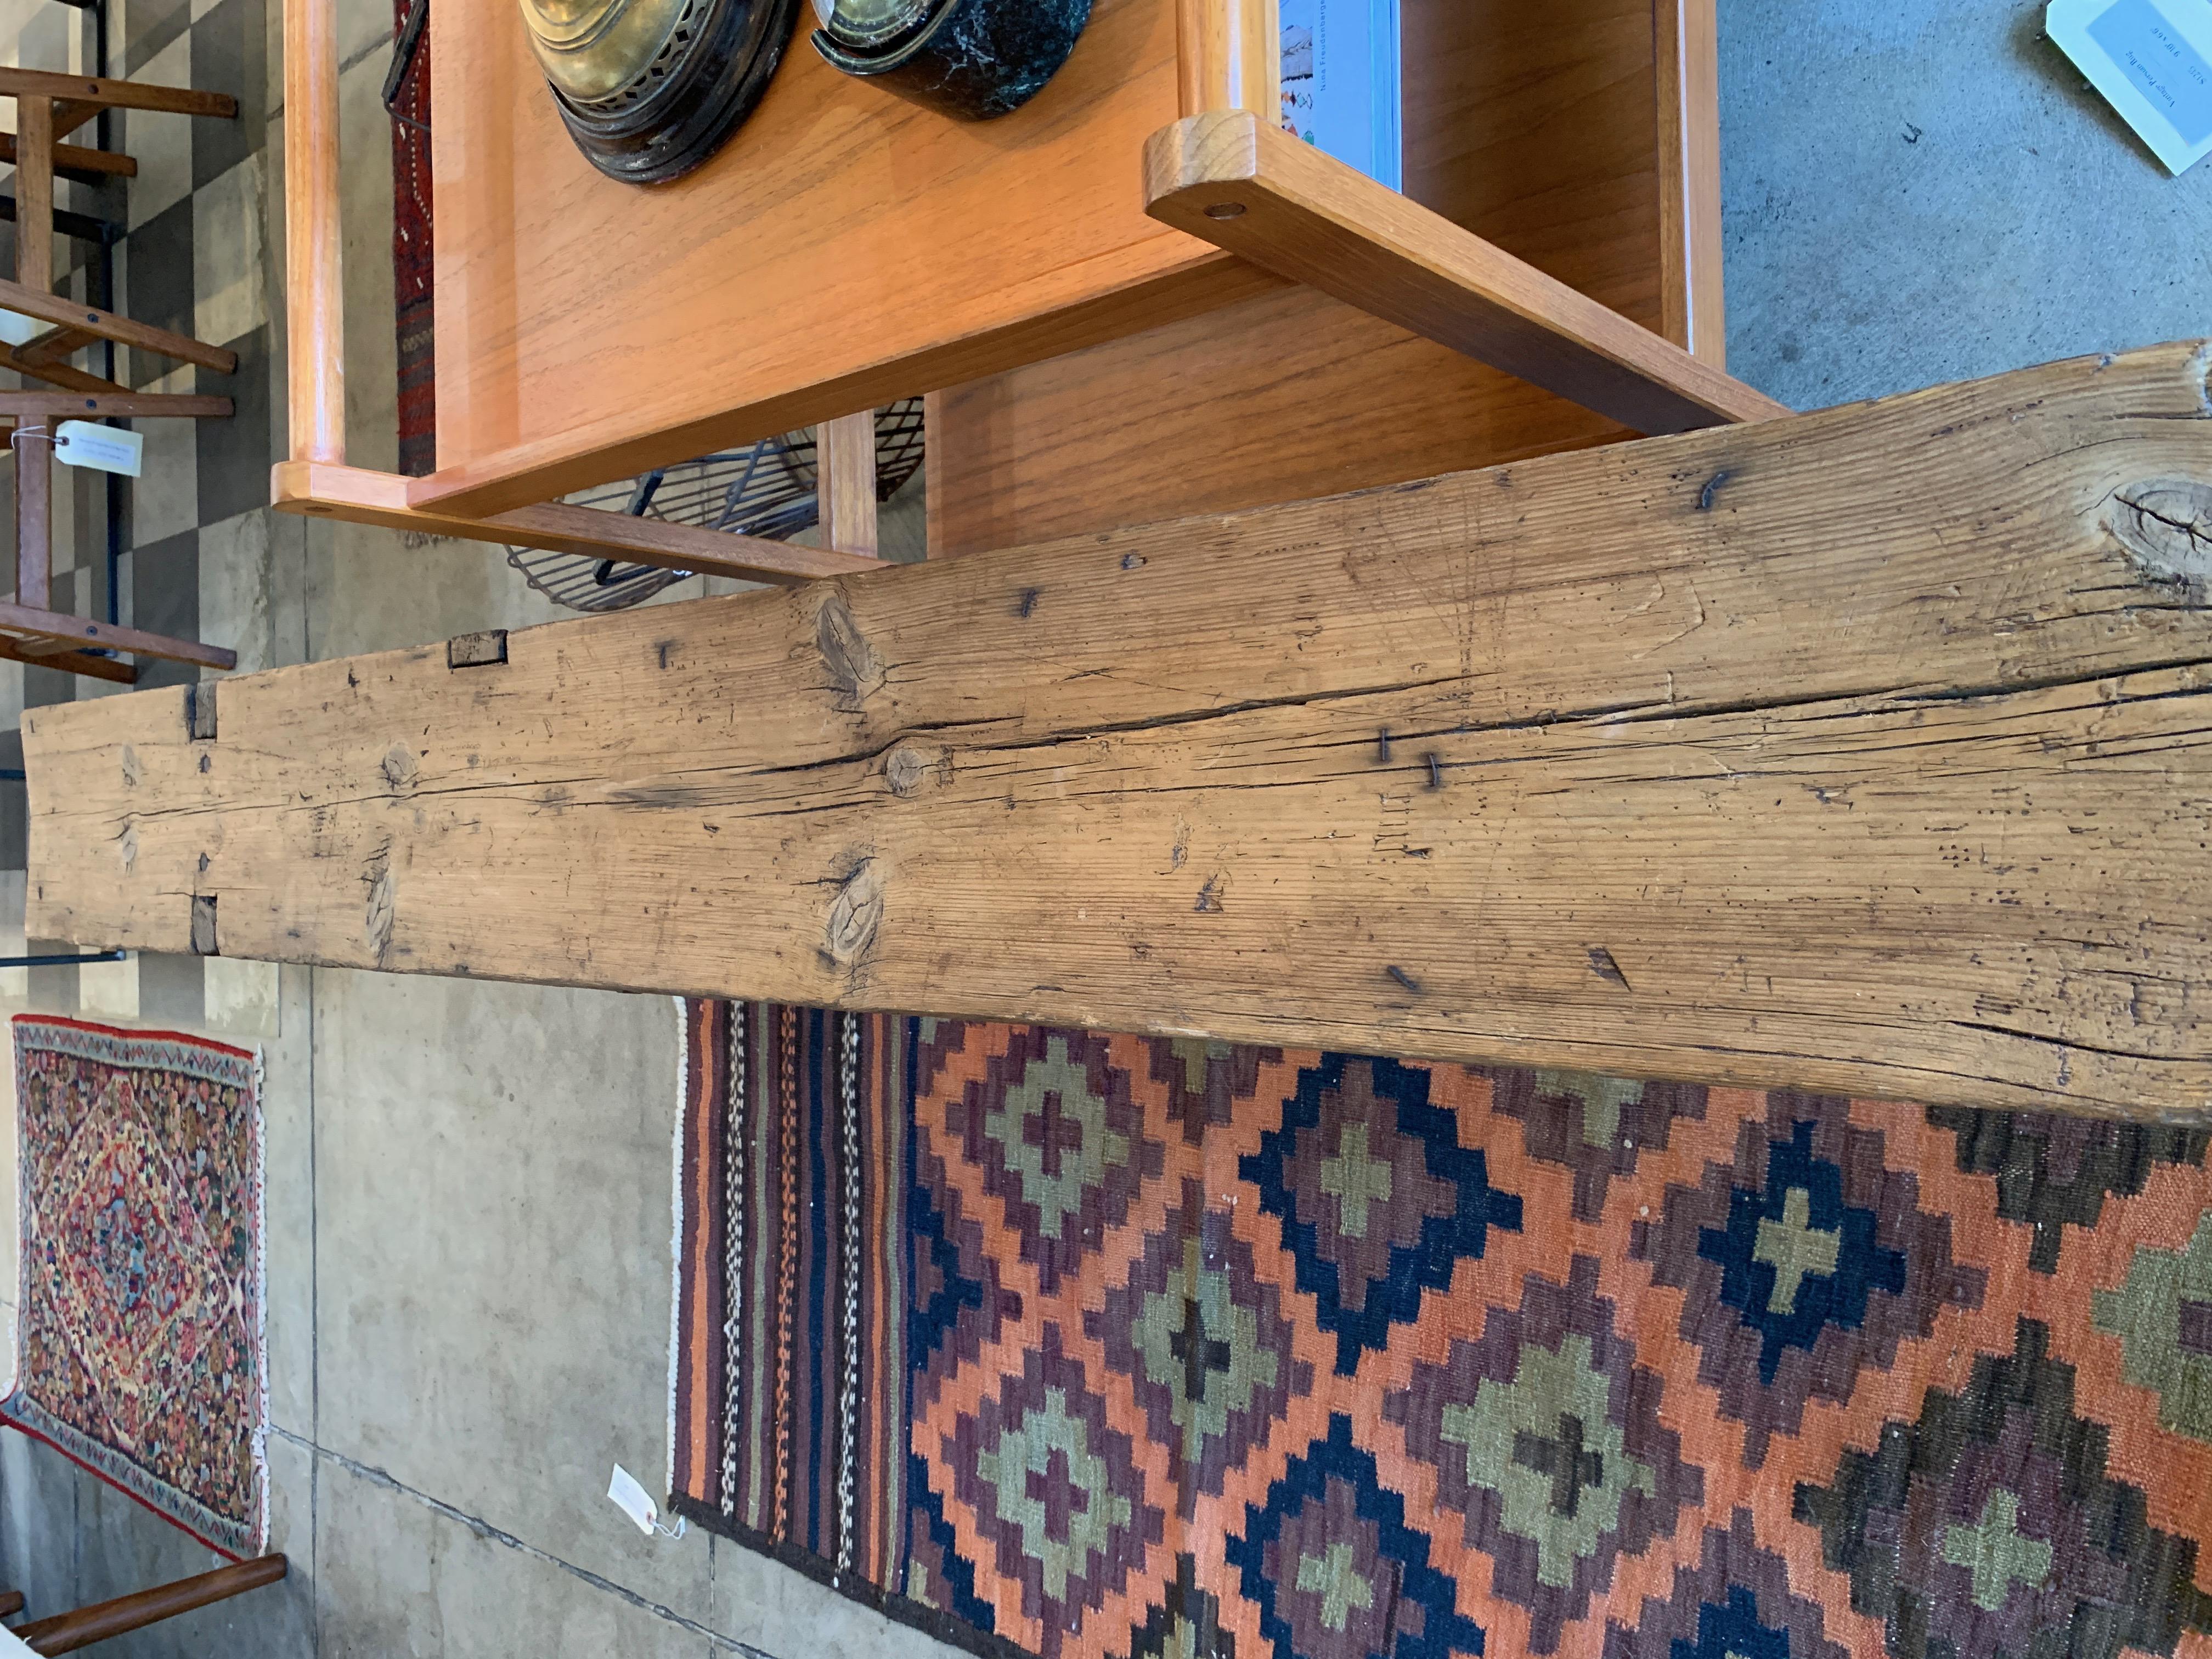 A Classic rustic farm bench with arrowed block legs, angular supports and wood aged perfectly with lots of character. This long bench is great for an entryway, garden or as seating with a dining table.